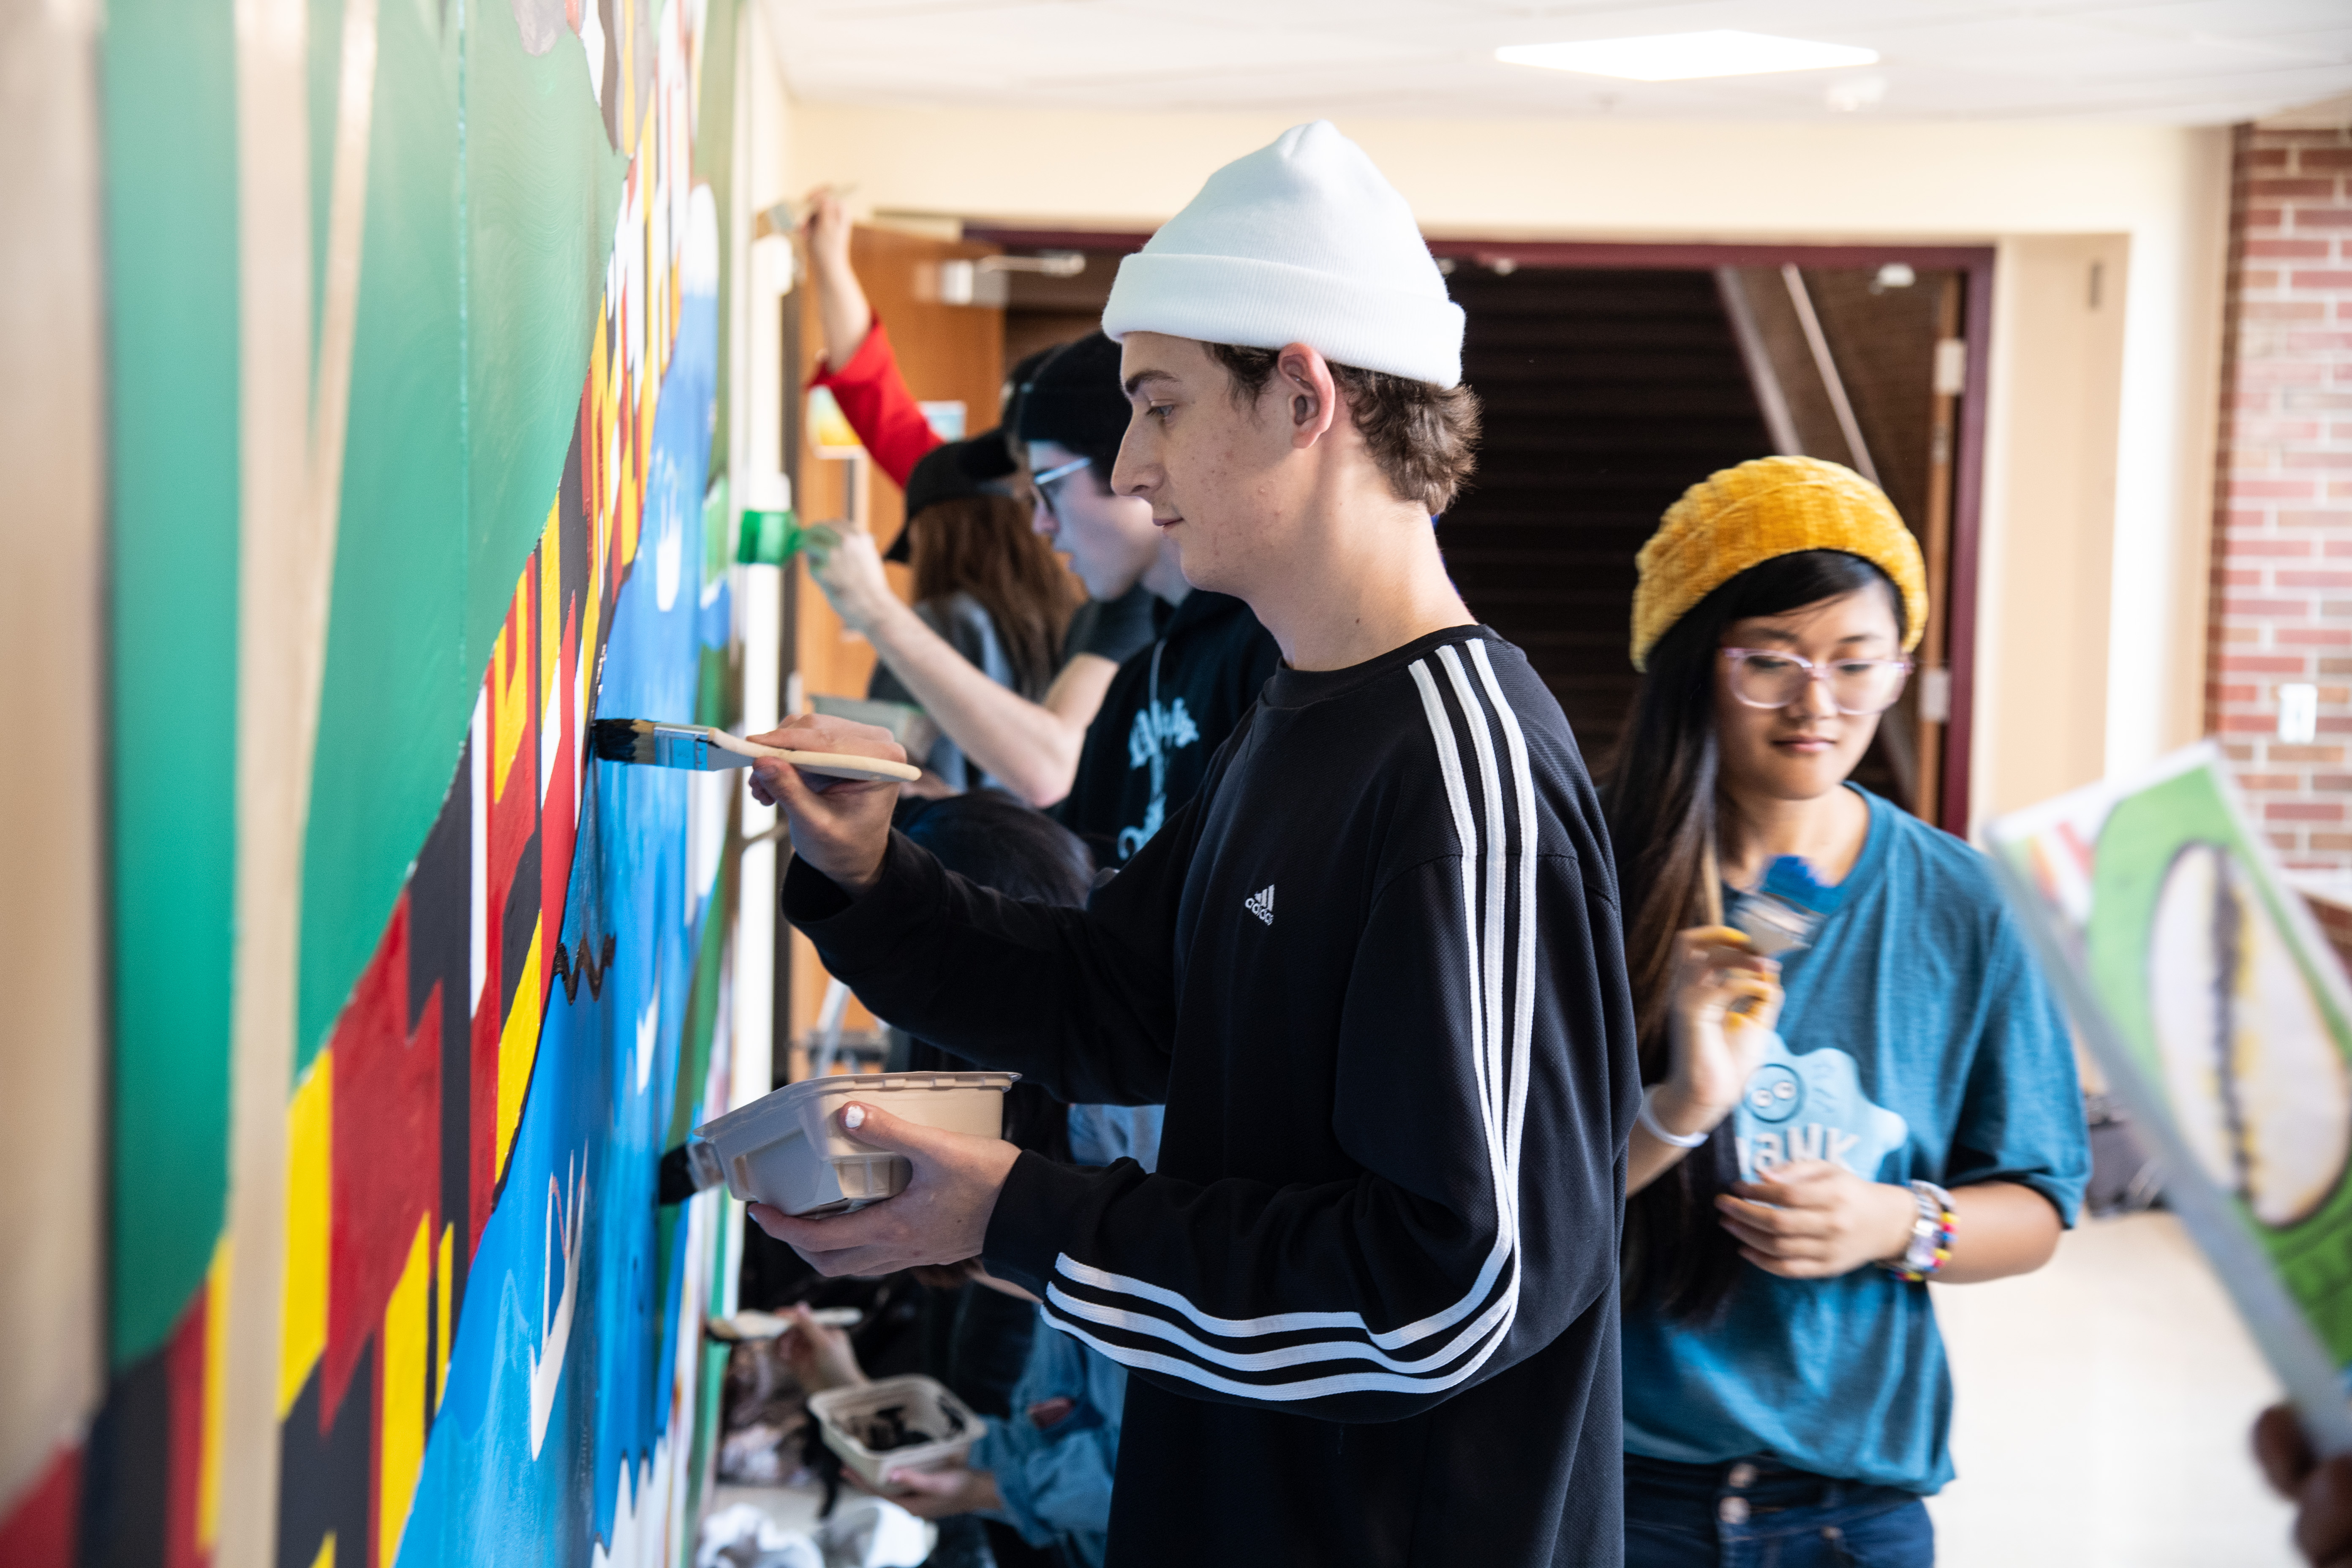 Variety of students painting a mural.